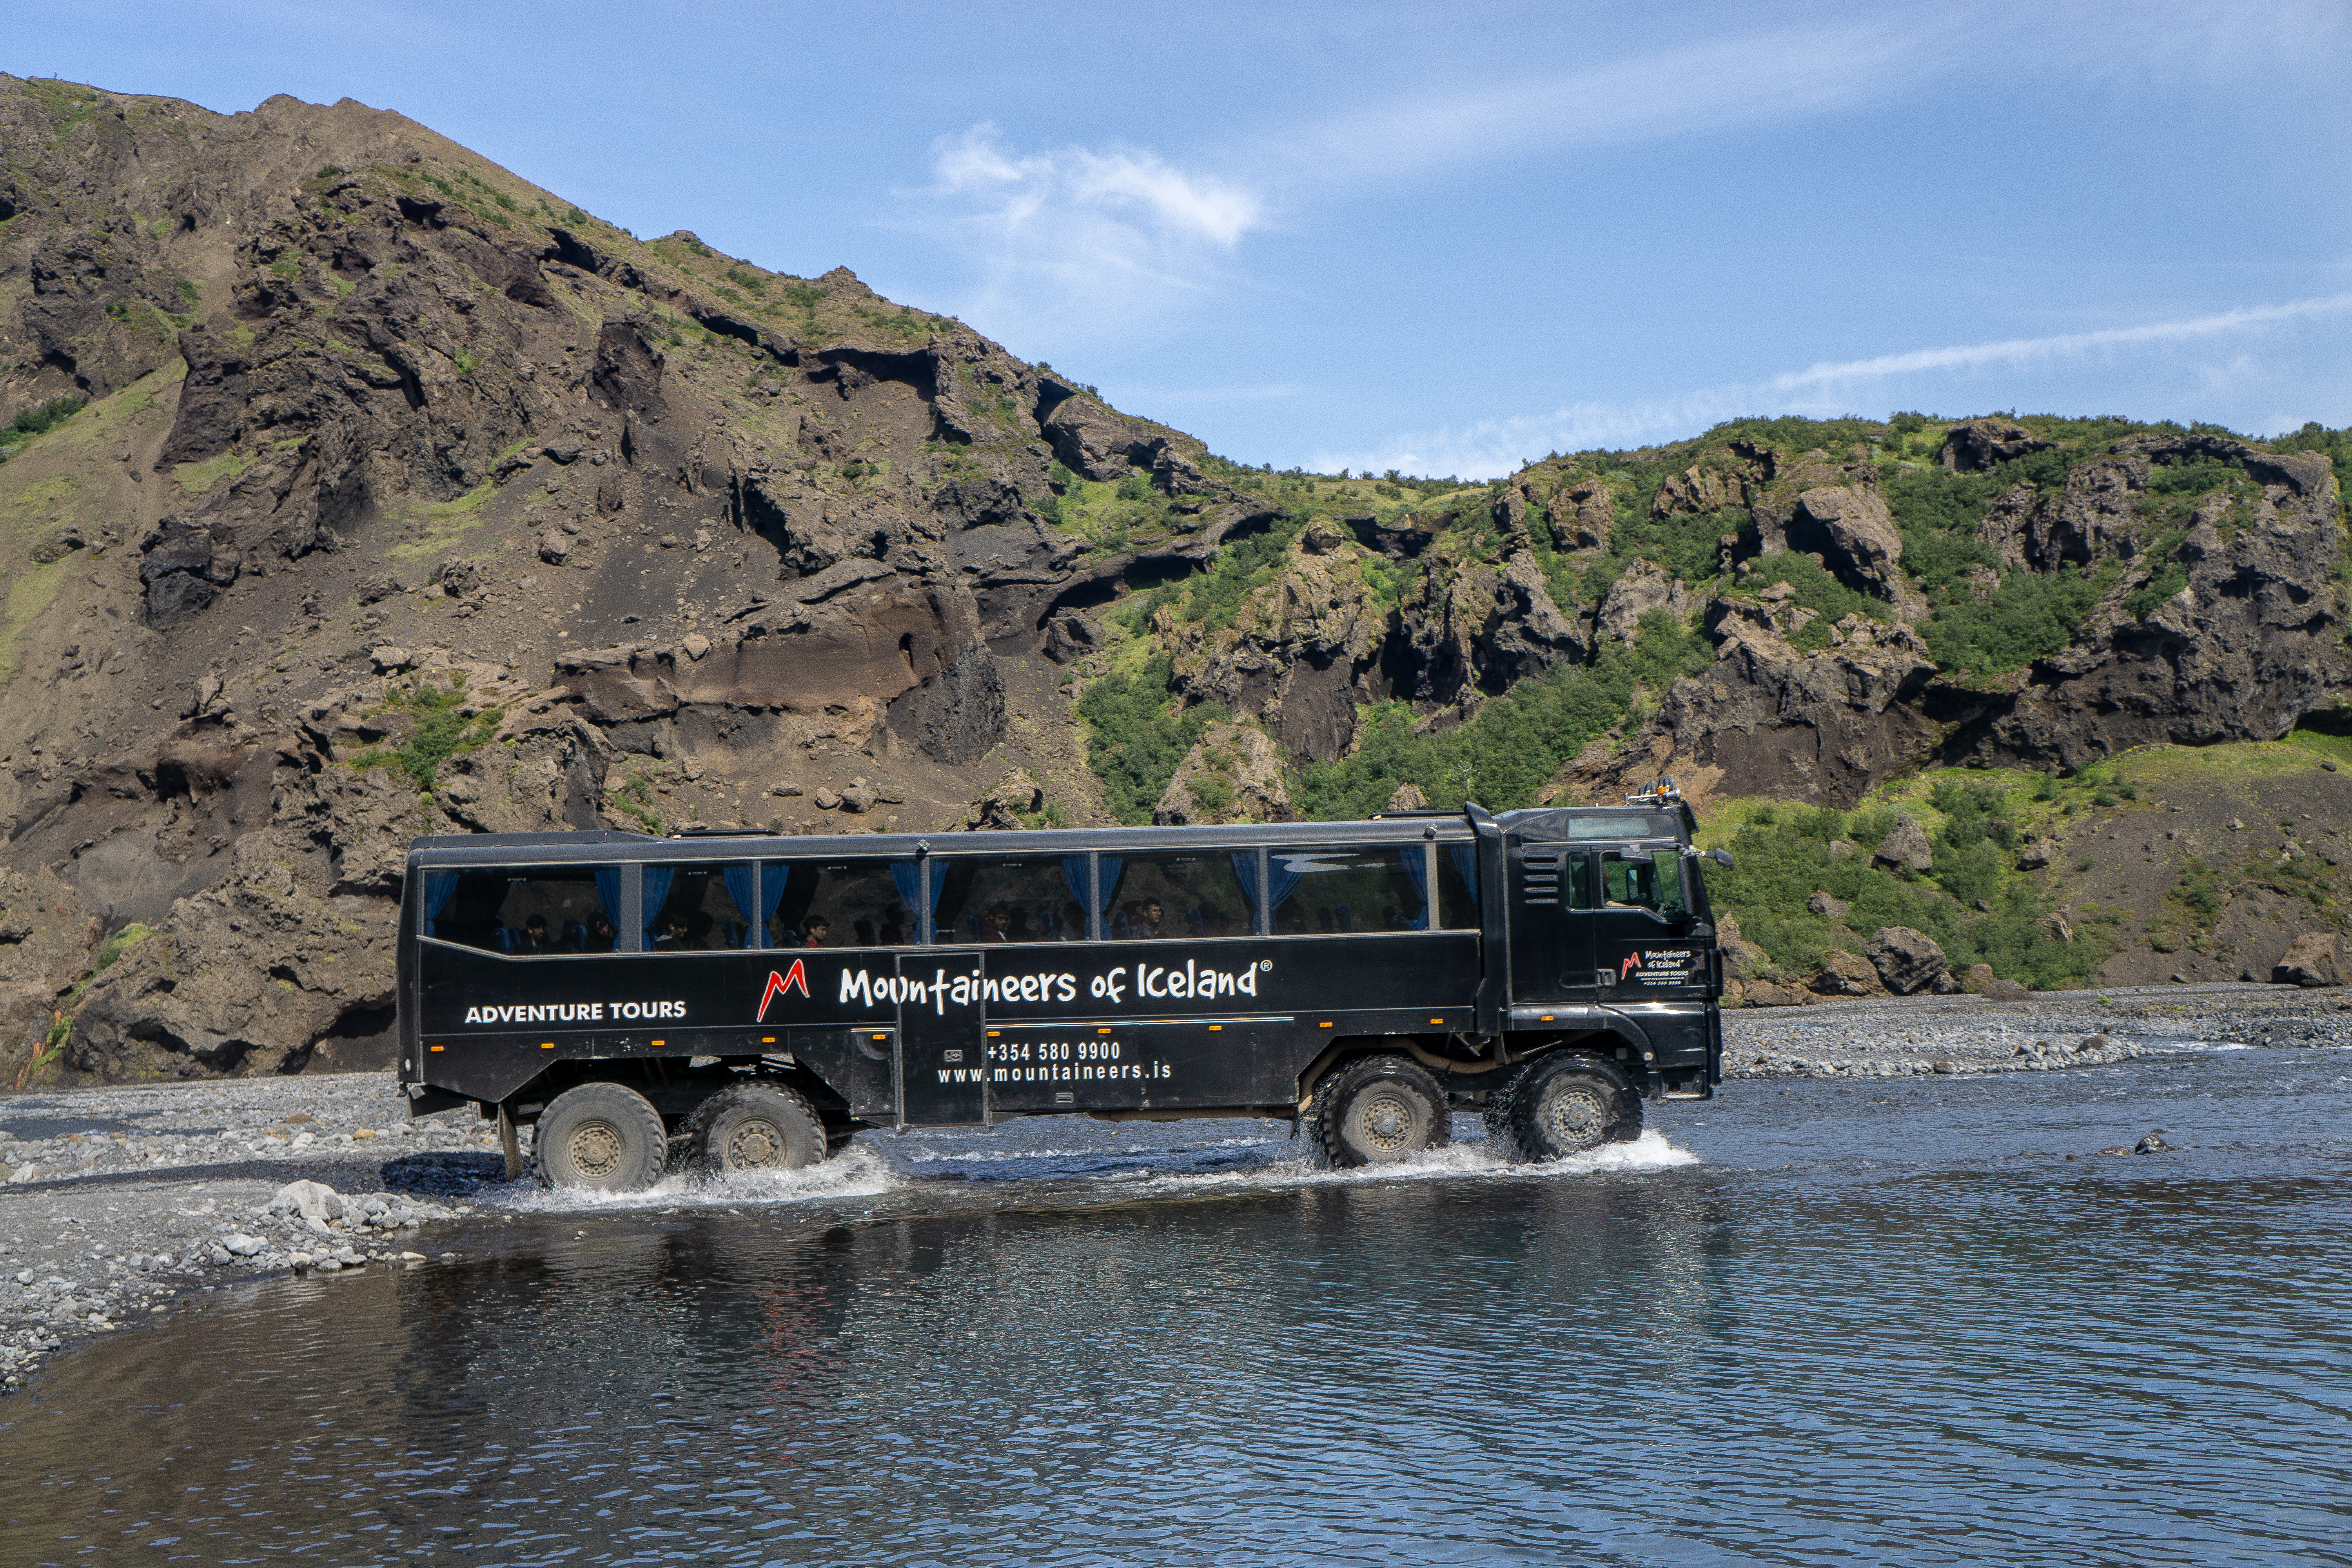 Huge buses conquer rivers with ease